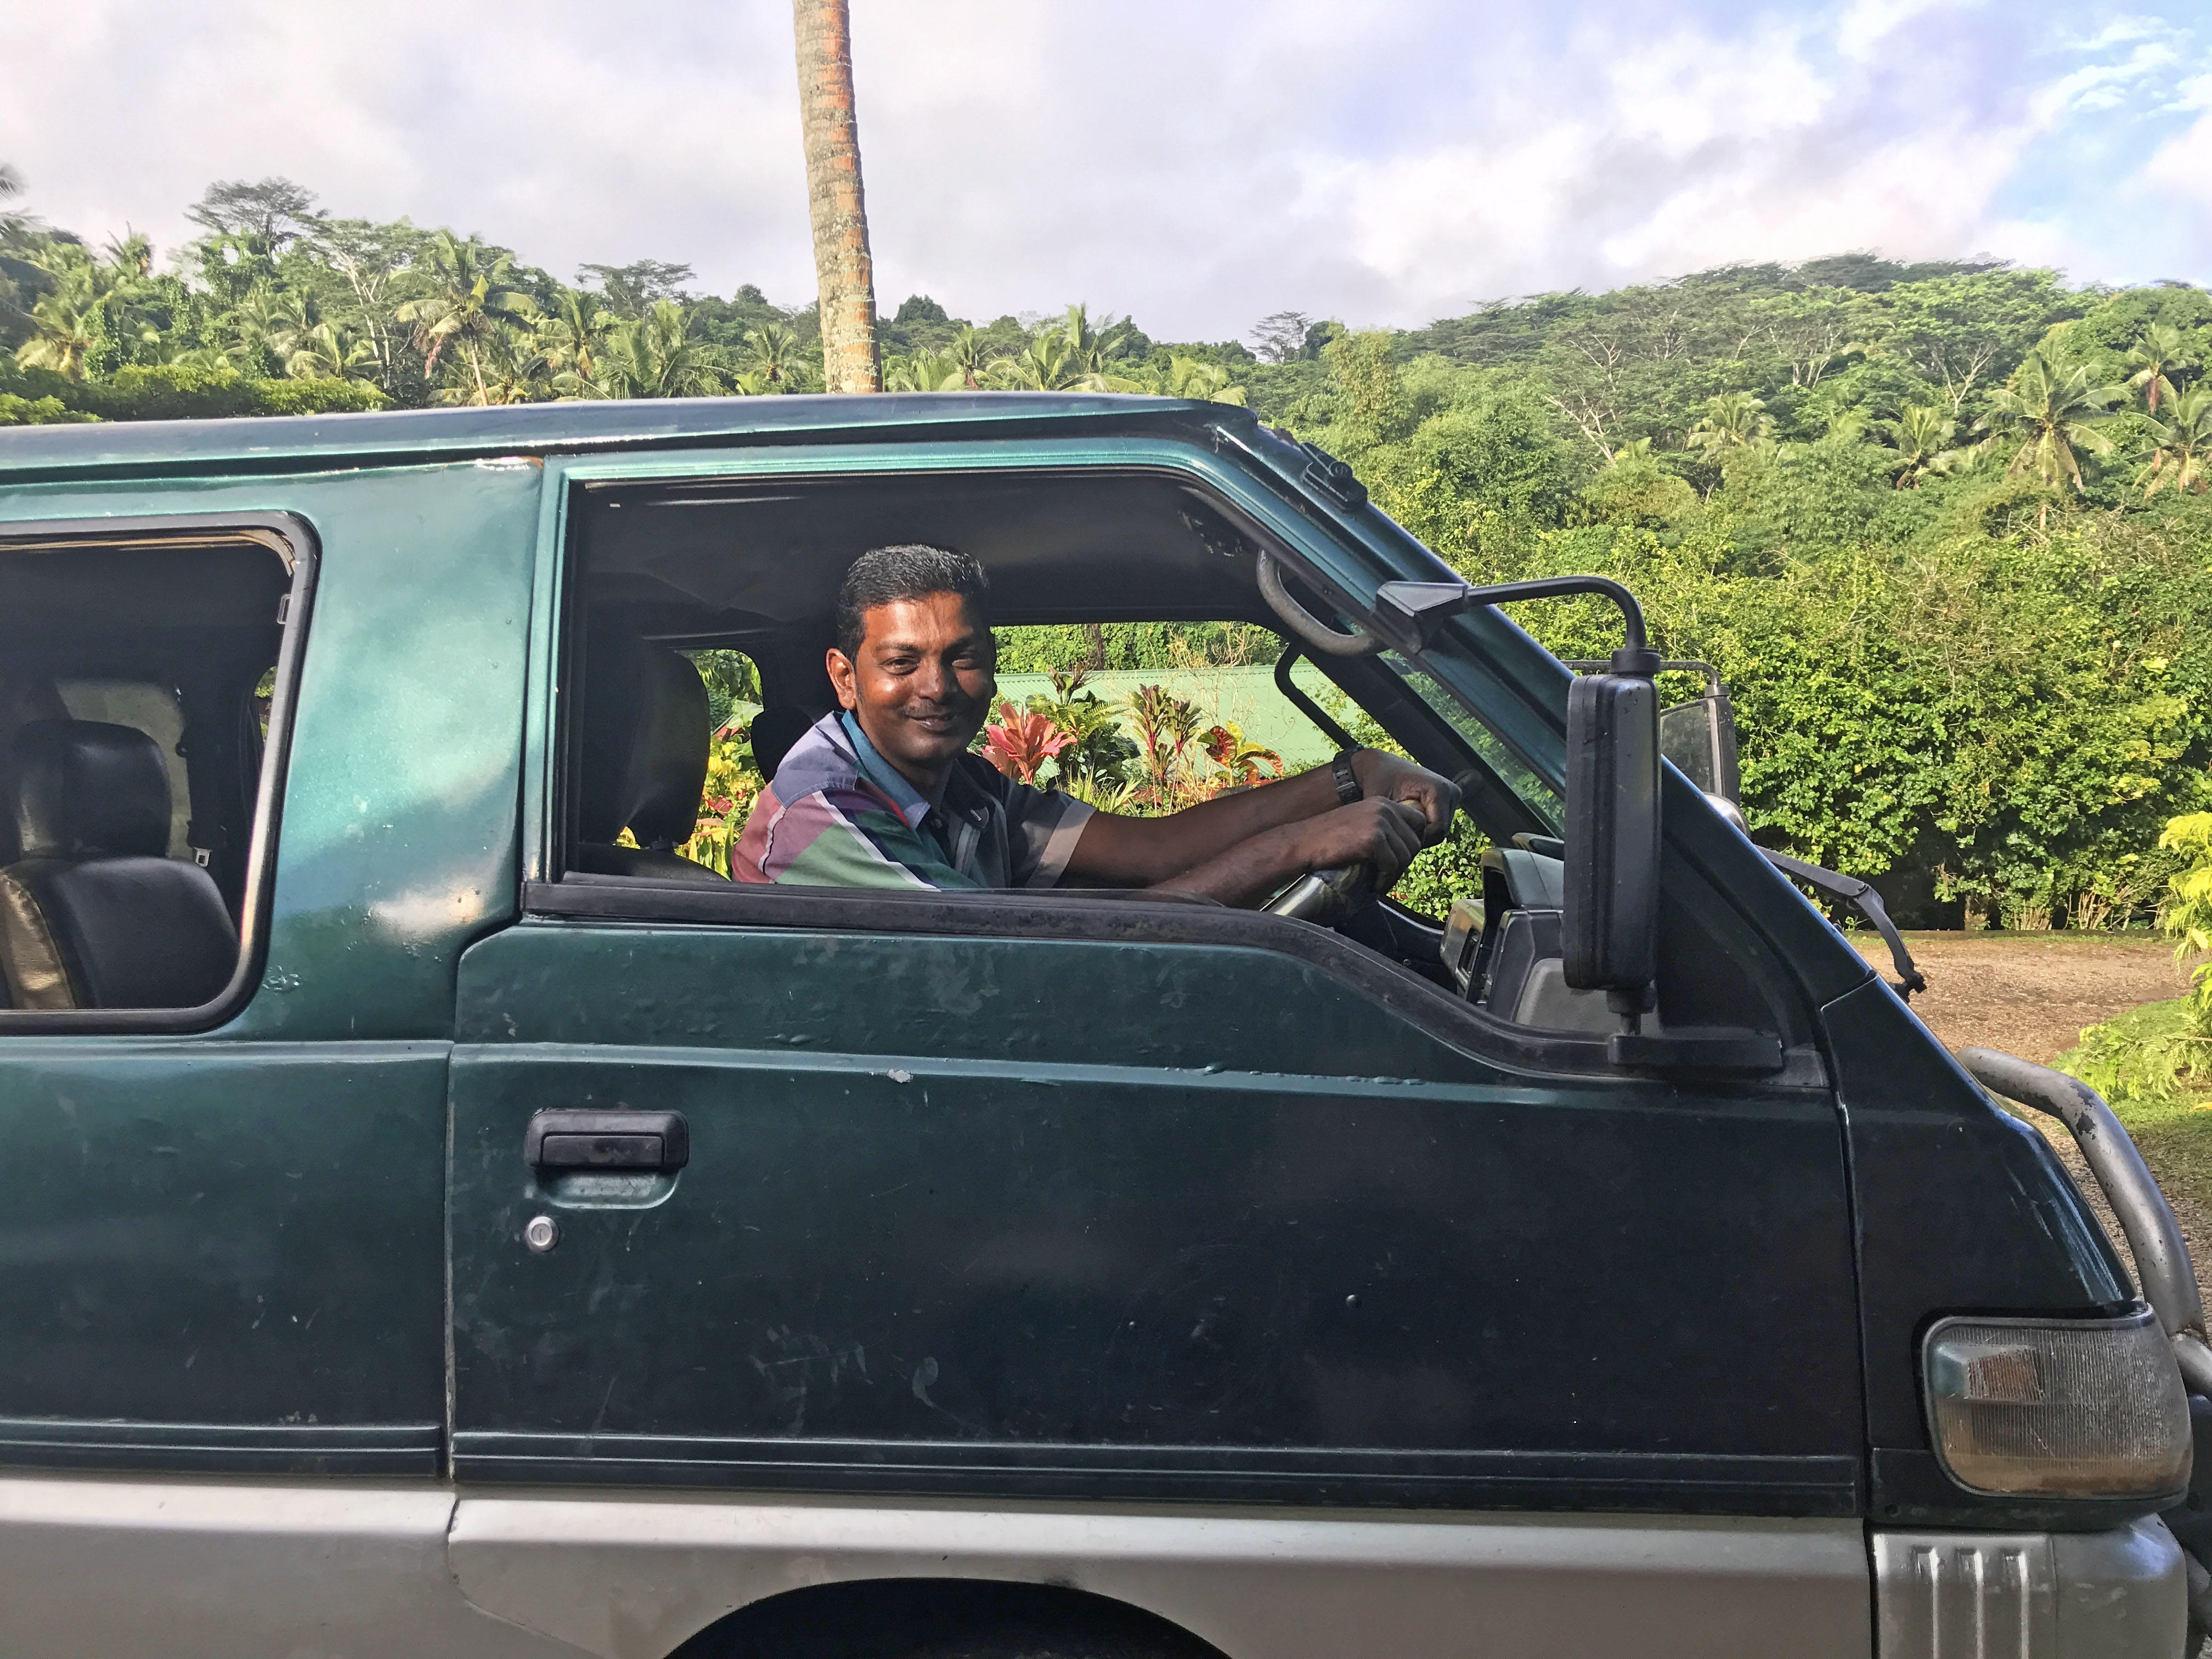 A kind man from Fiji, smiling from inside his car